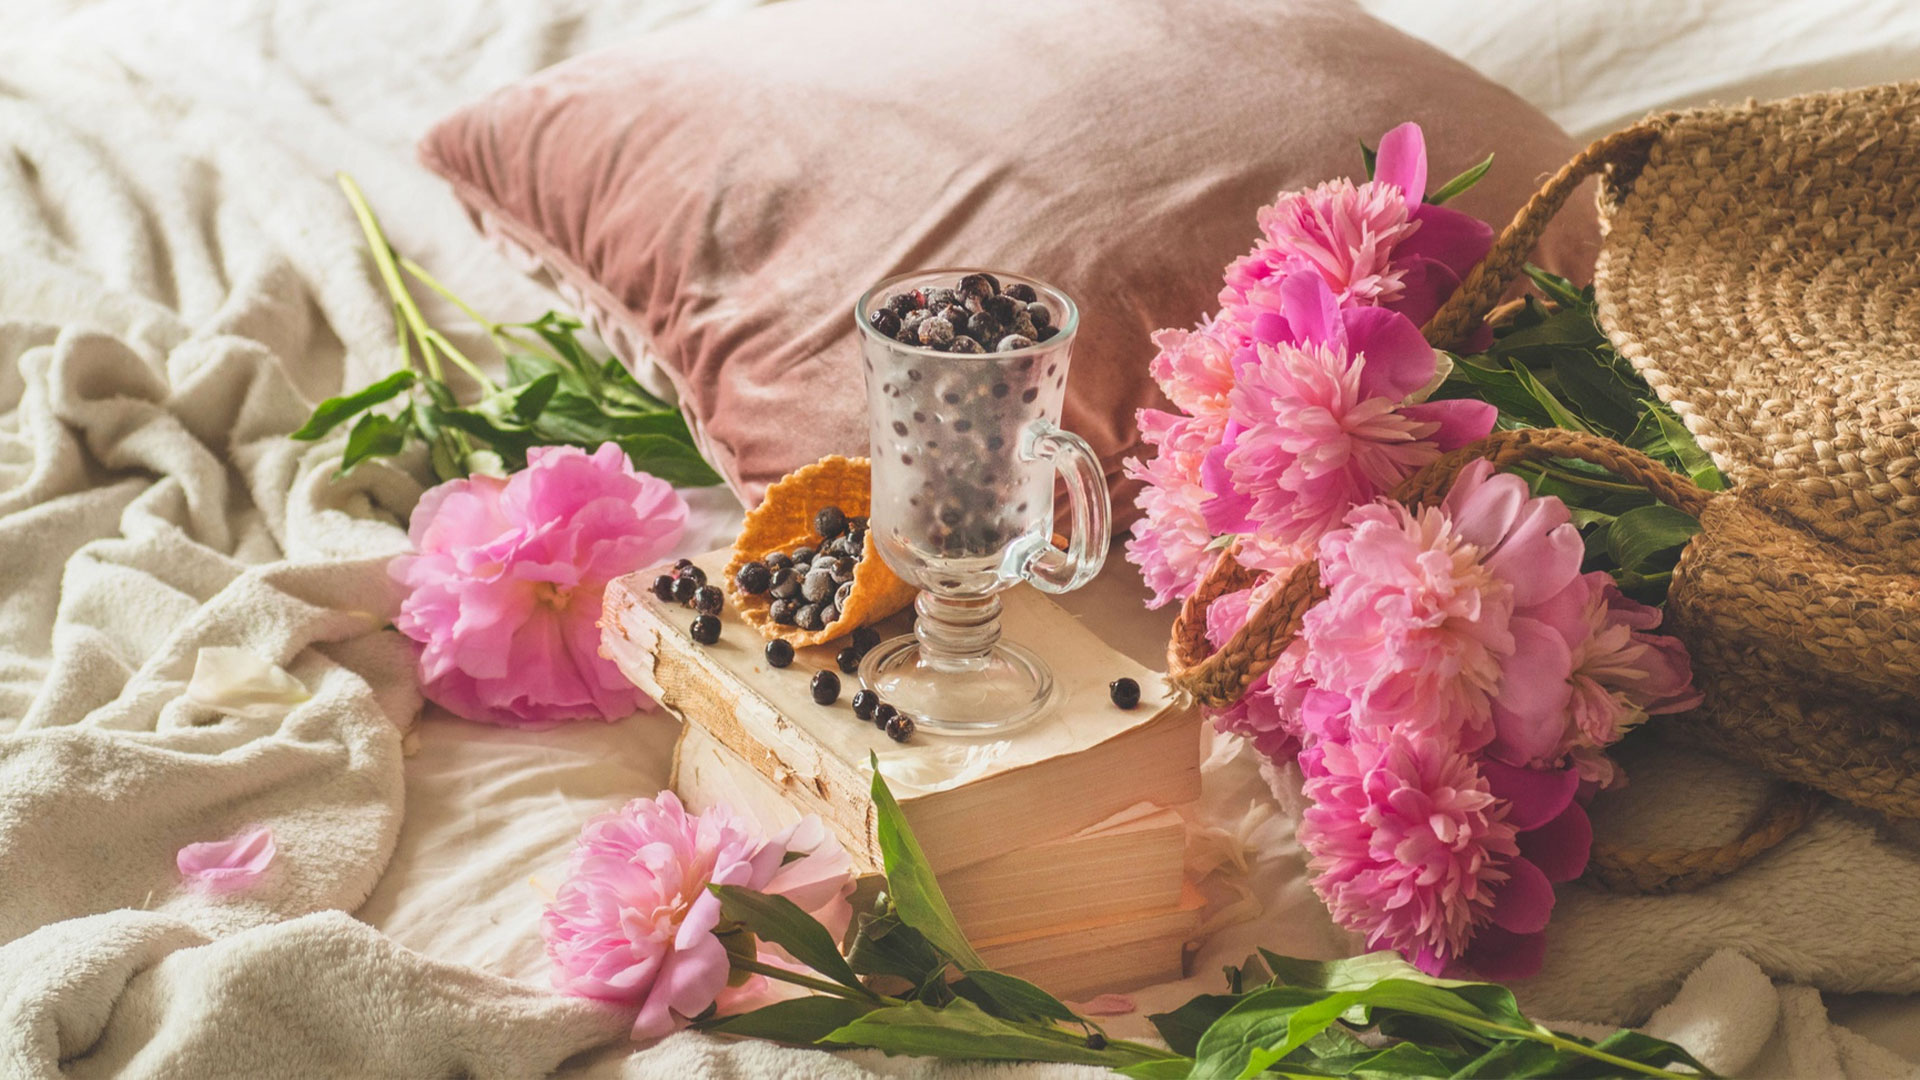 How Do Sweet Fragrance Perfumes Differ from Other Scent Profiles? ​